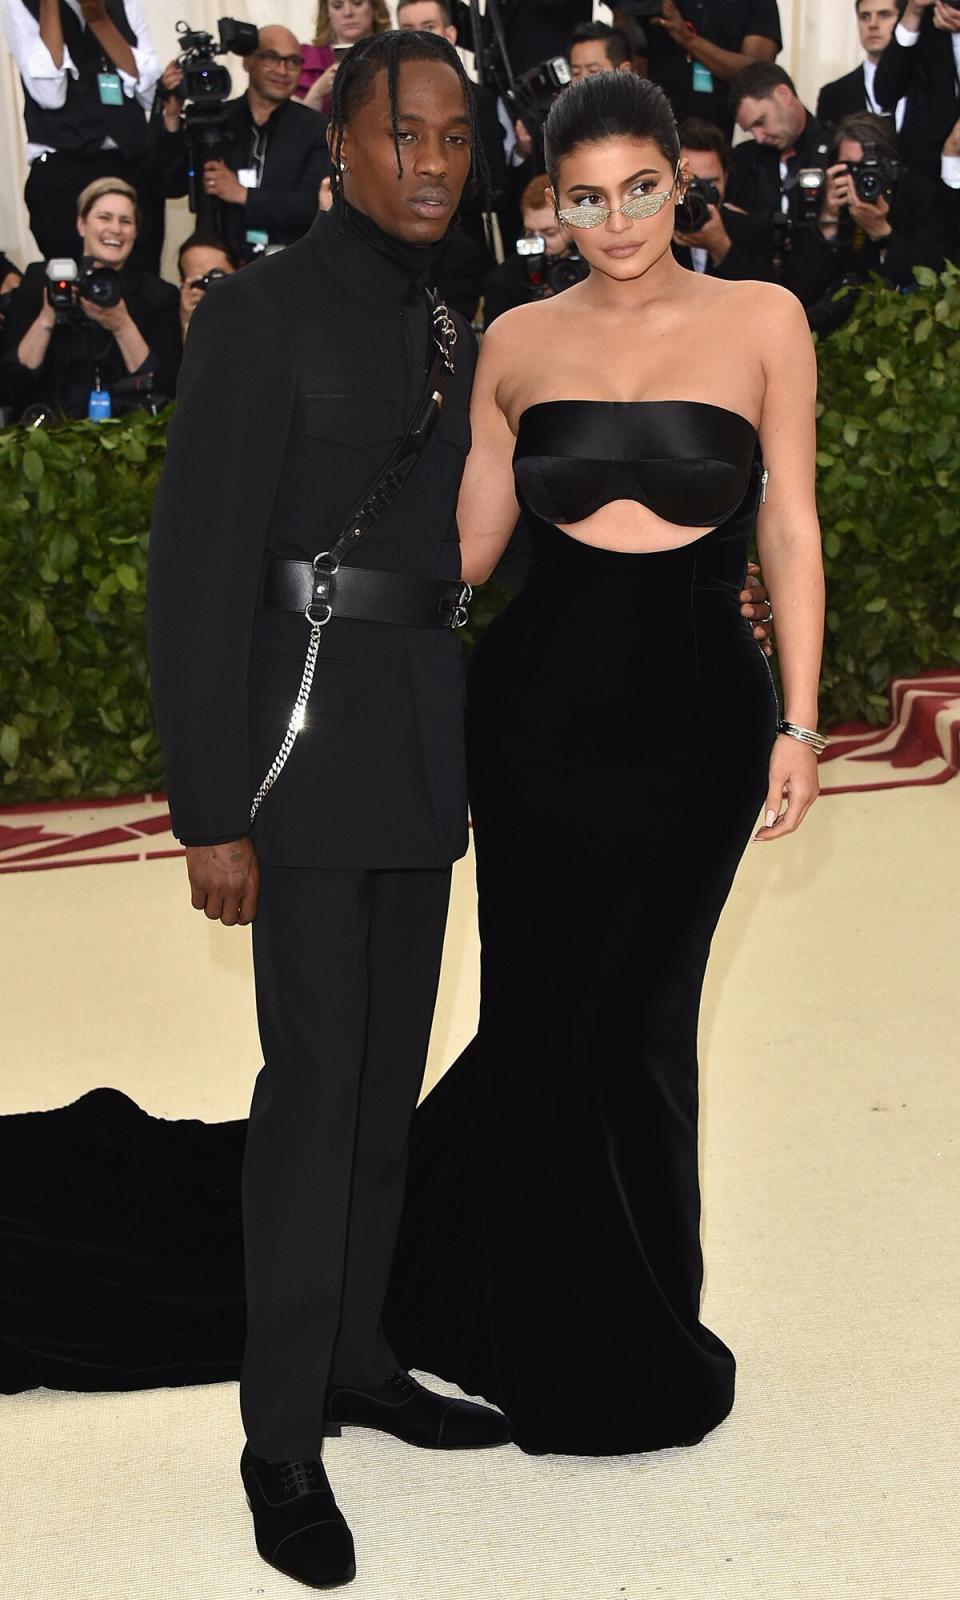 Travis Scott and Kylie Jenner attend the Heavenly Bodies: Fashion & The Catholic Imagination Costume Institute Gala at The Metropolitan Museum of Art on May 7, 2018 in New York City